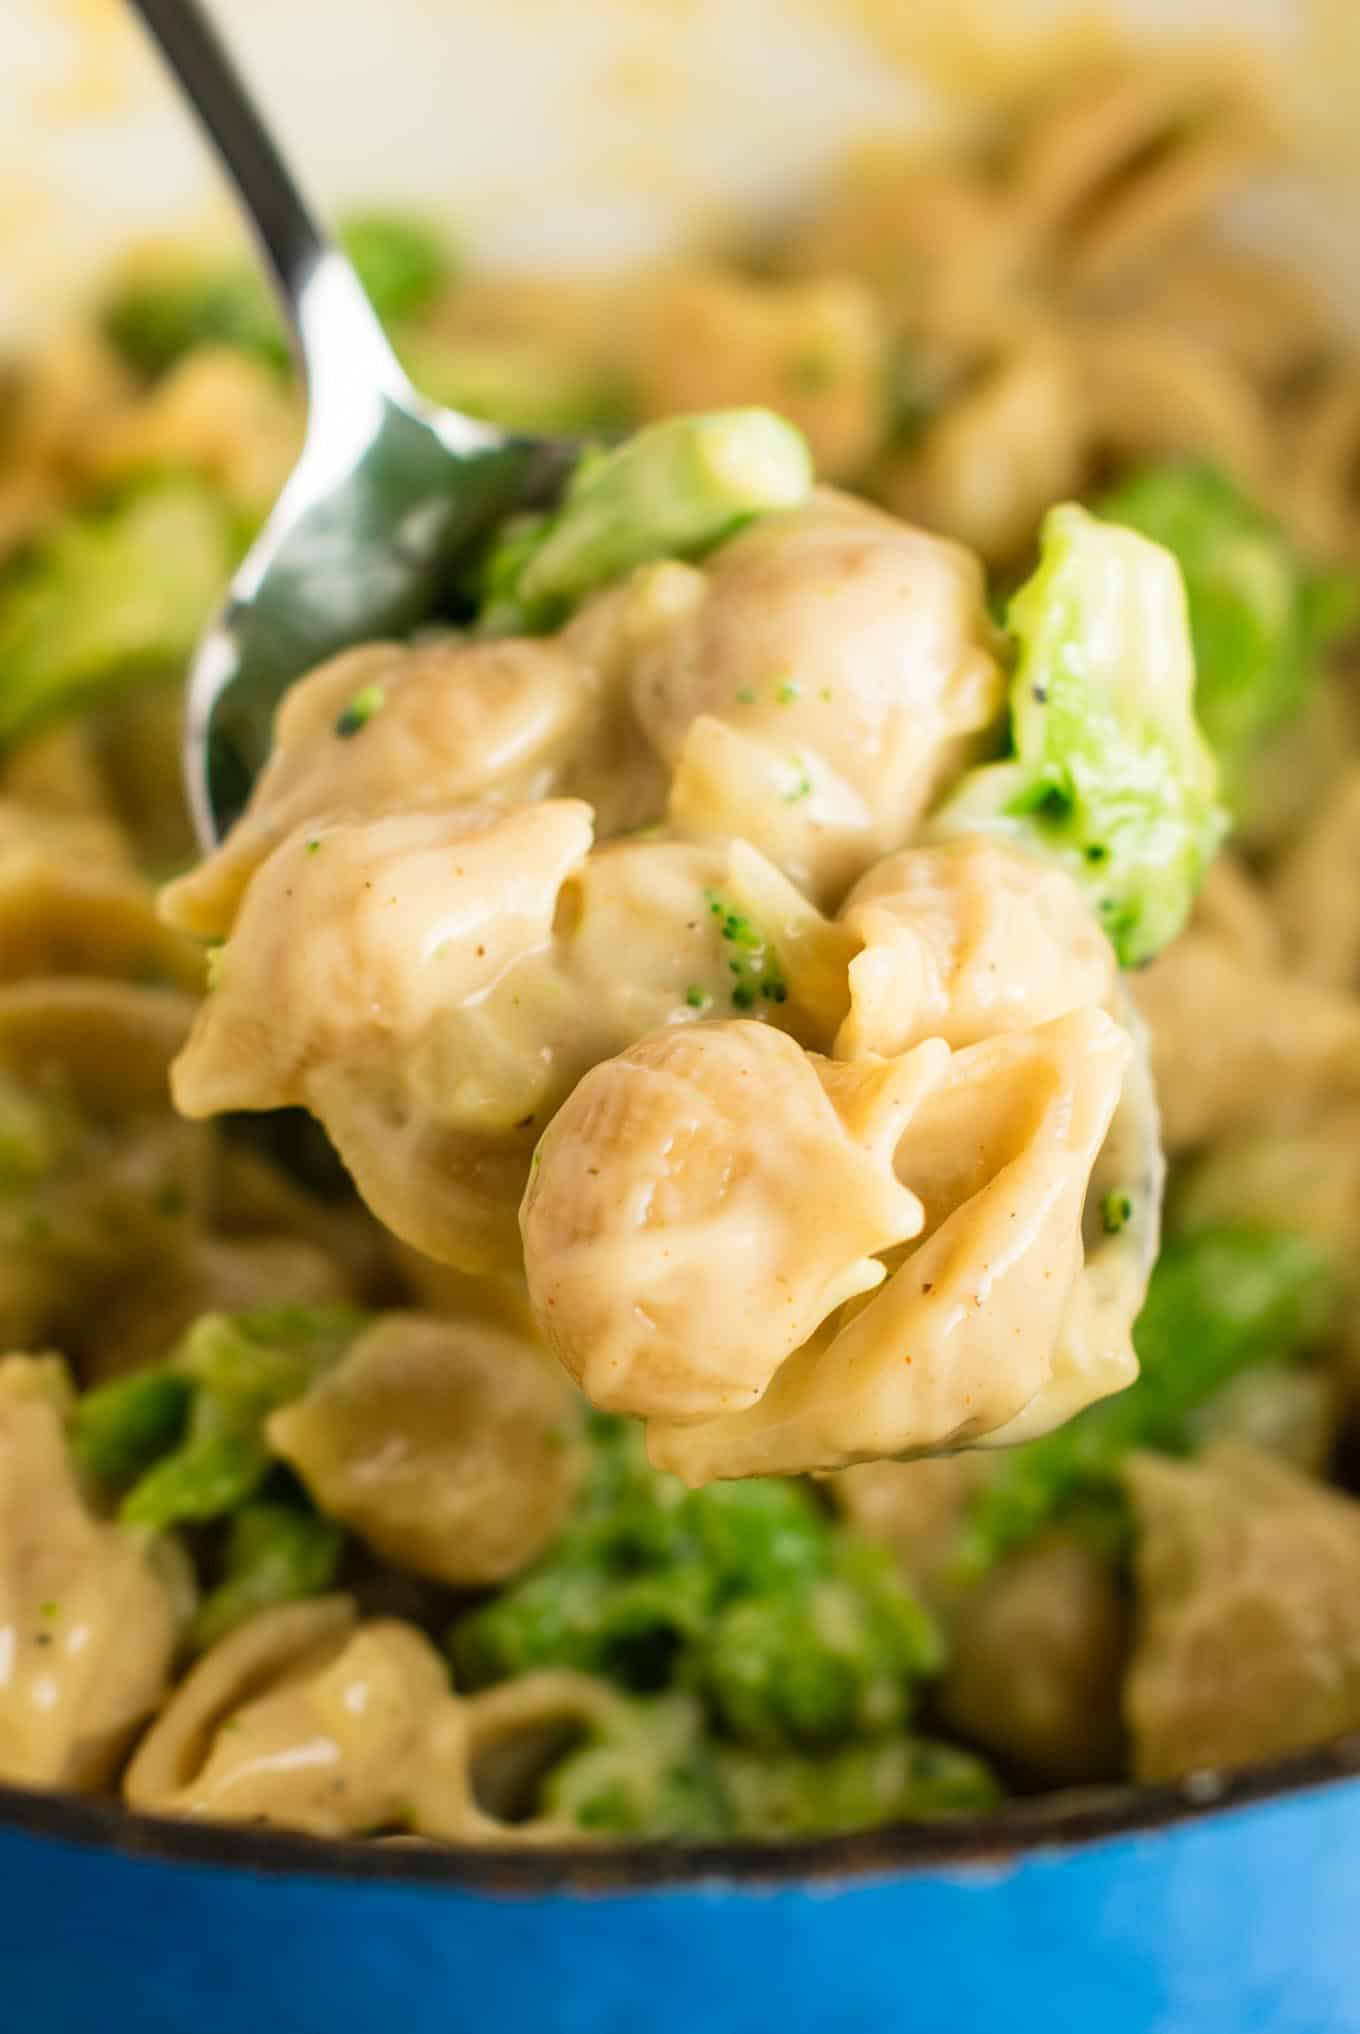 Lightened up broccoli mac and cheese with sharp cheddar cheese and whole wheat pasta. The healthiest way to justify eating macaroni and cheese for dinner. Kids will love this one! #broccolishellsandcheese #macandcheese #healthy #dinner #vegetarian #meatless #pasta #wholewheat